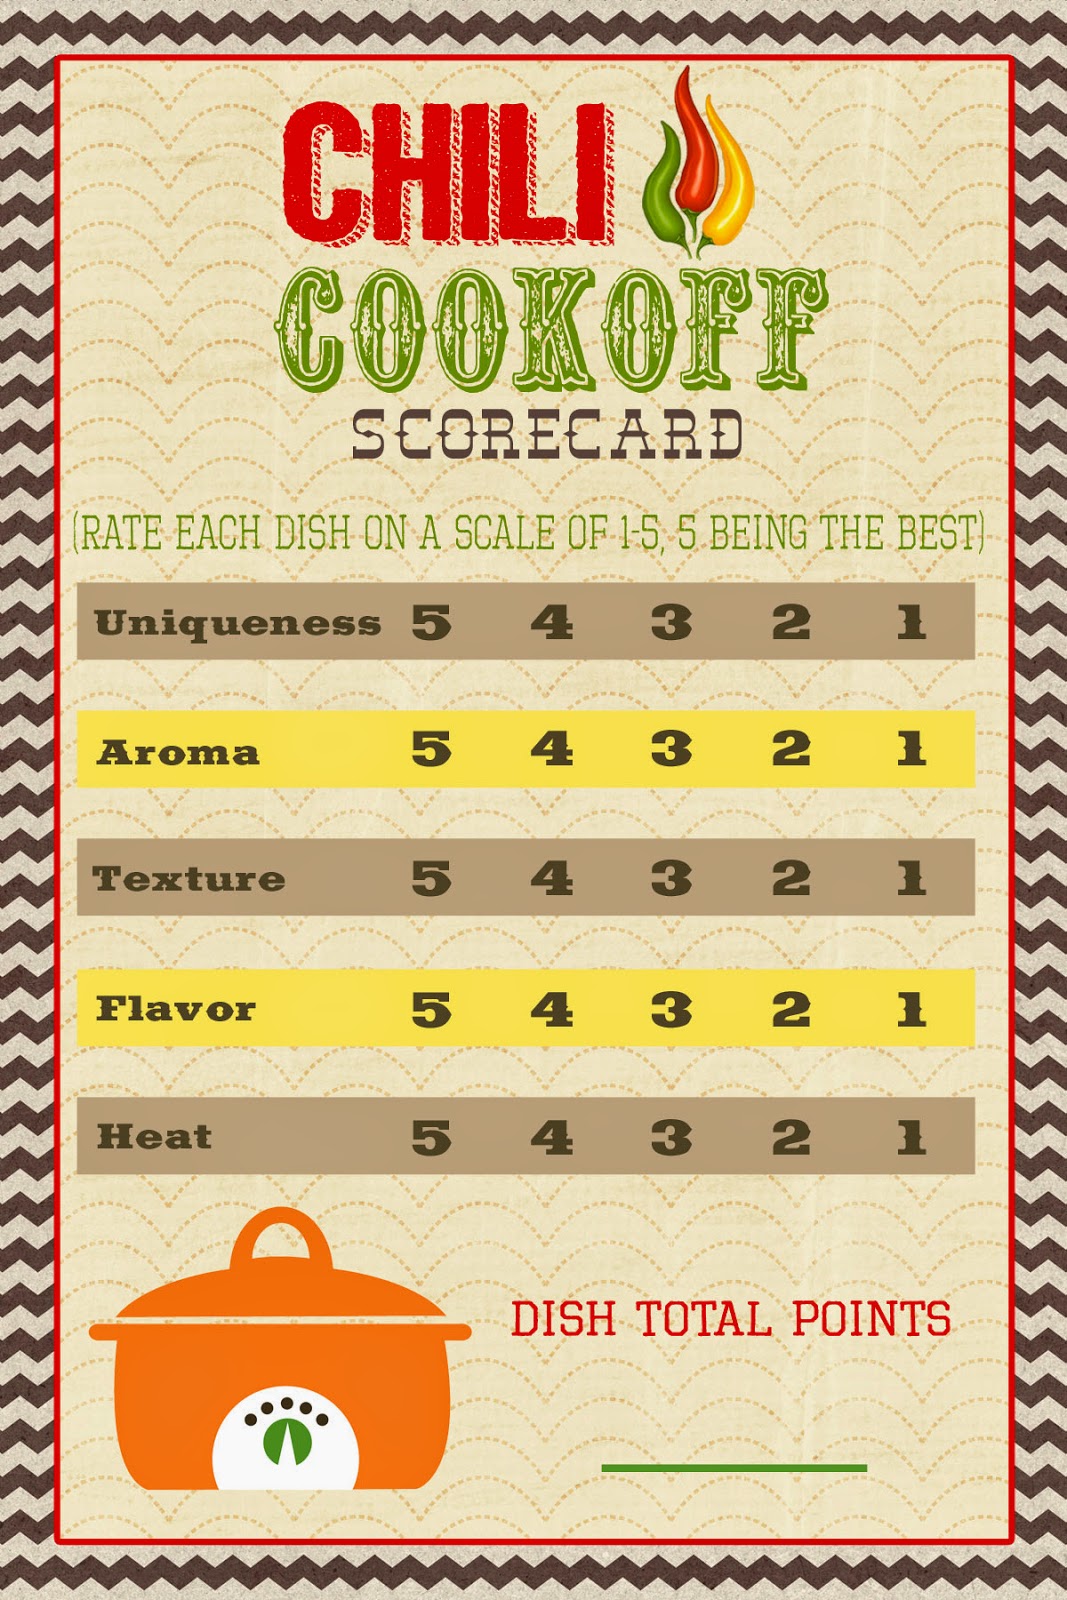 A Pocket full of LDS prints Chili Cookoff Scorecard